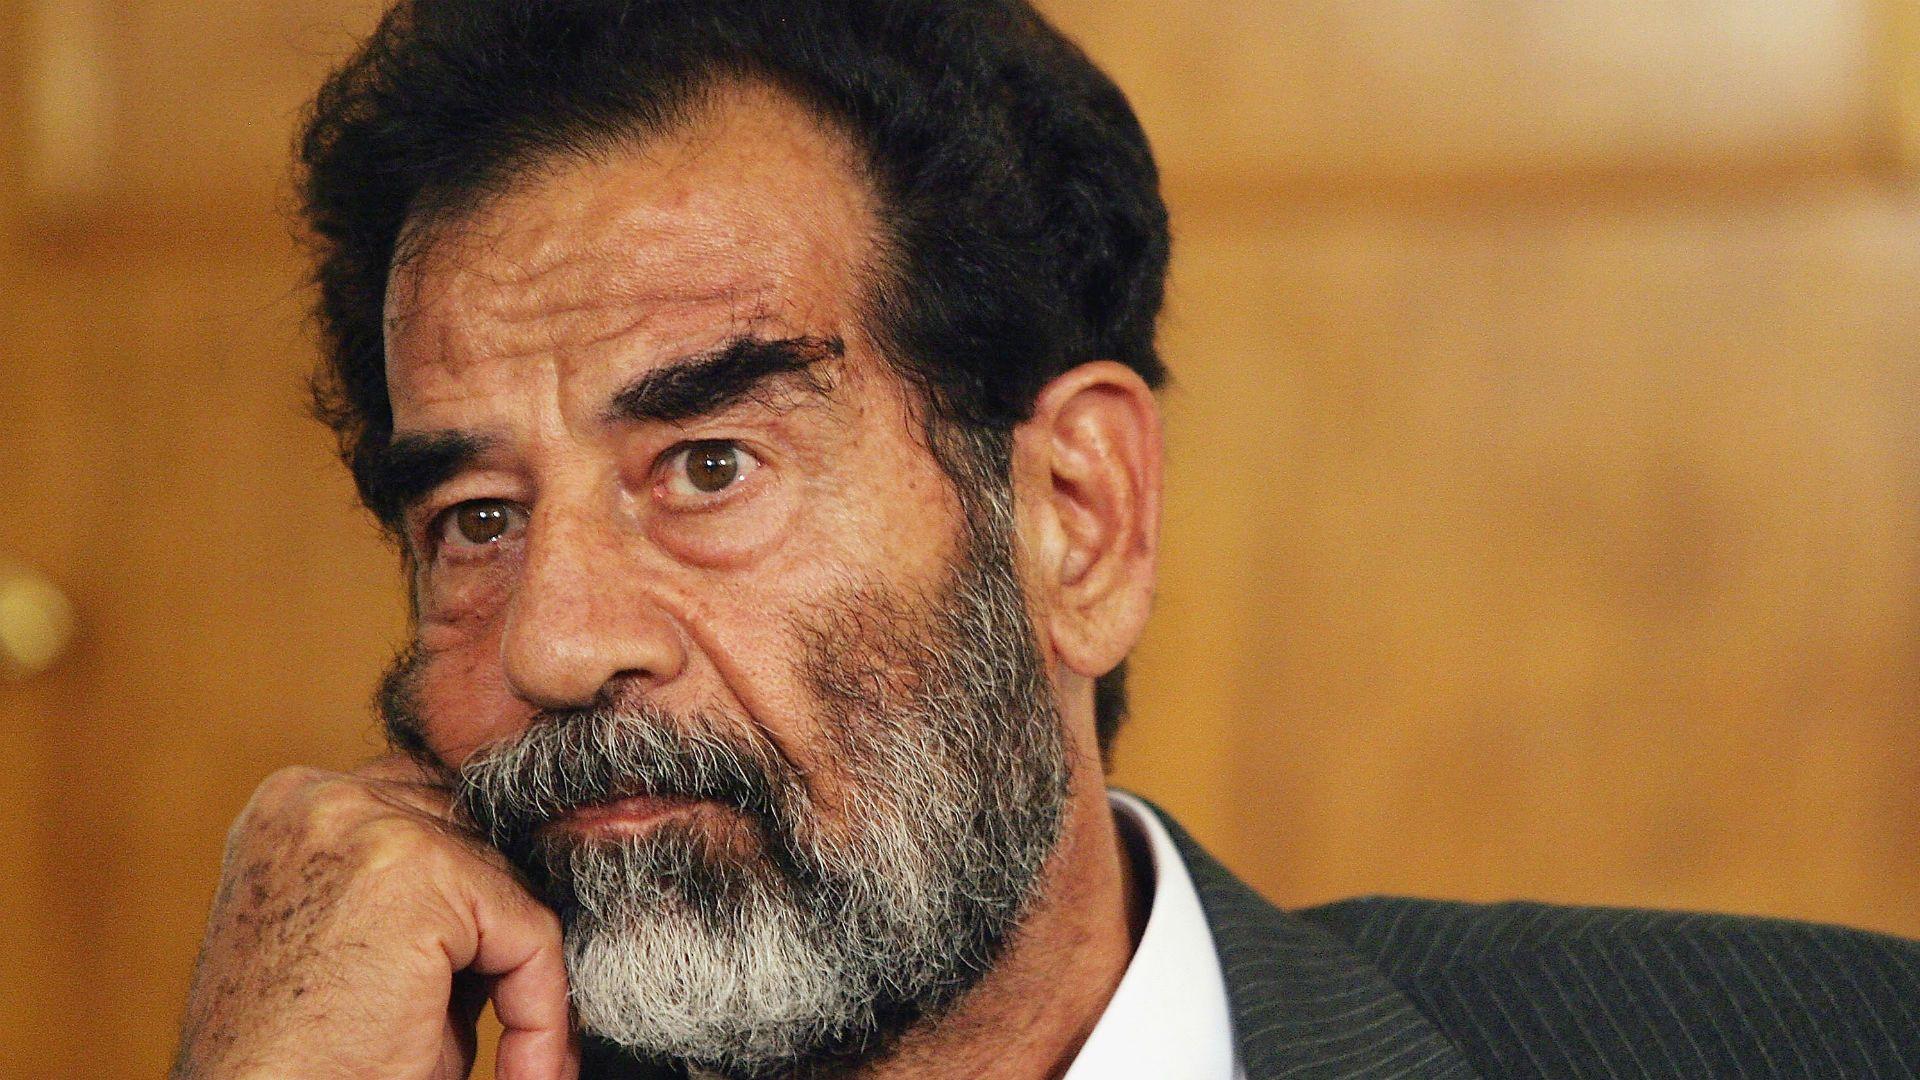 Saddam Hussein bust to be launched into space